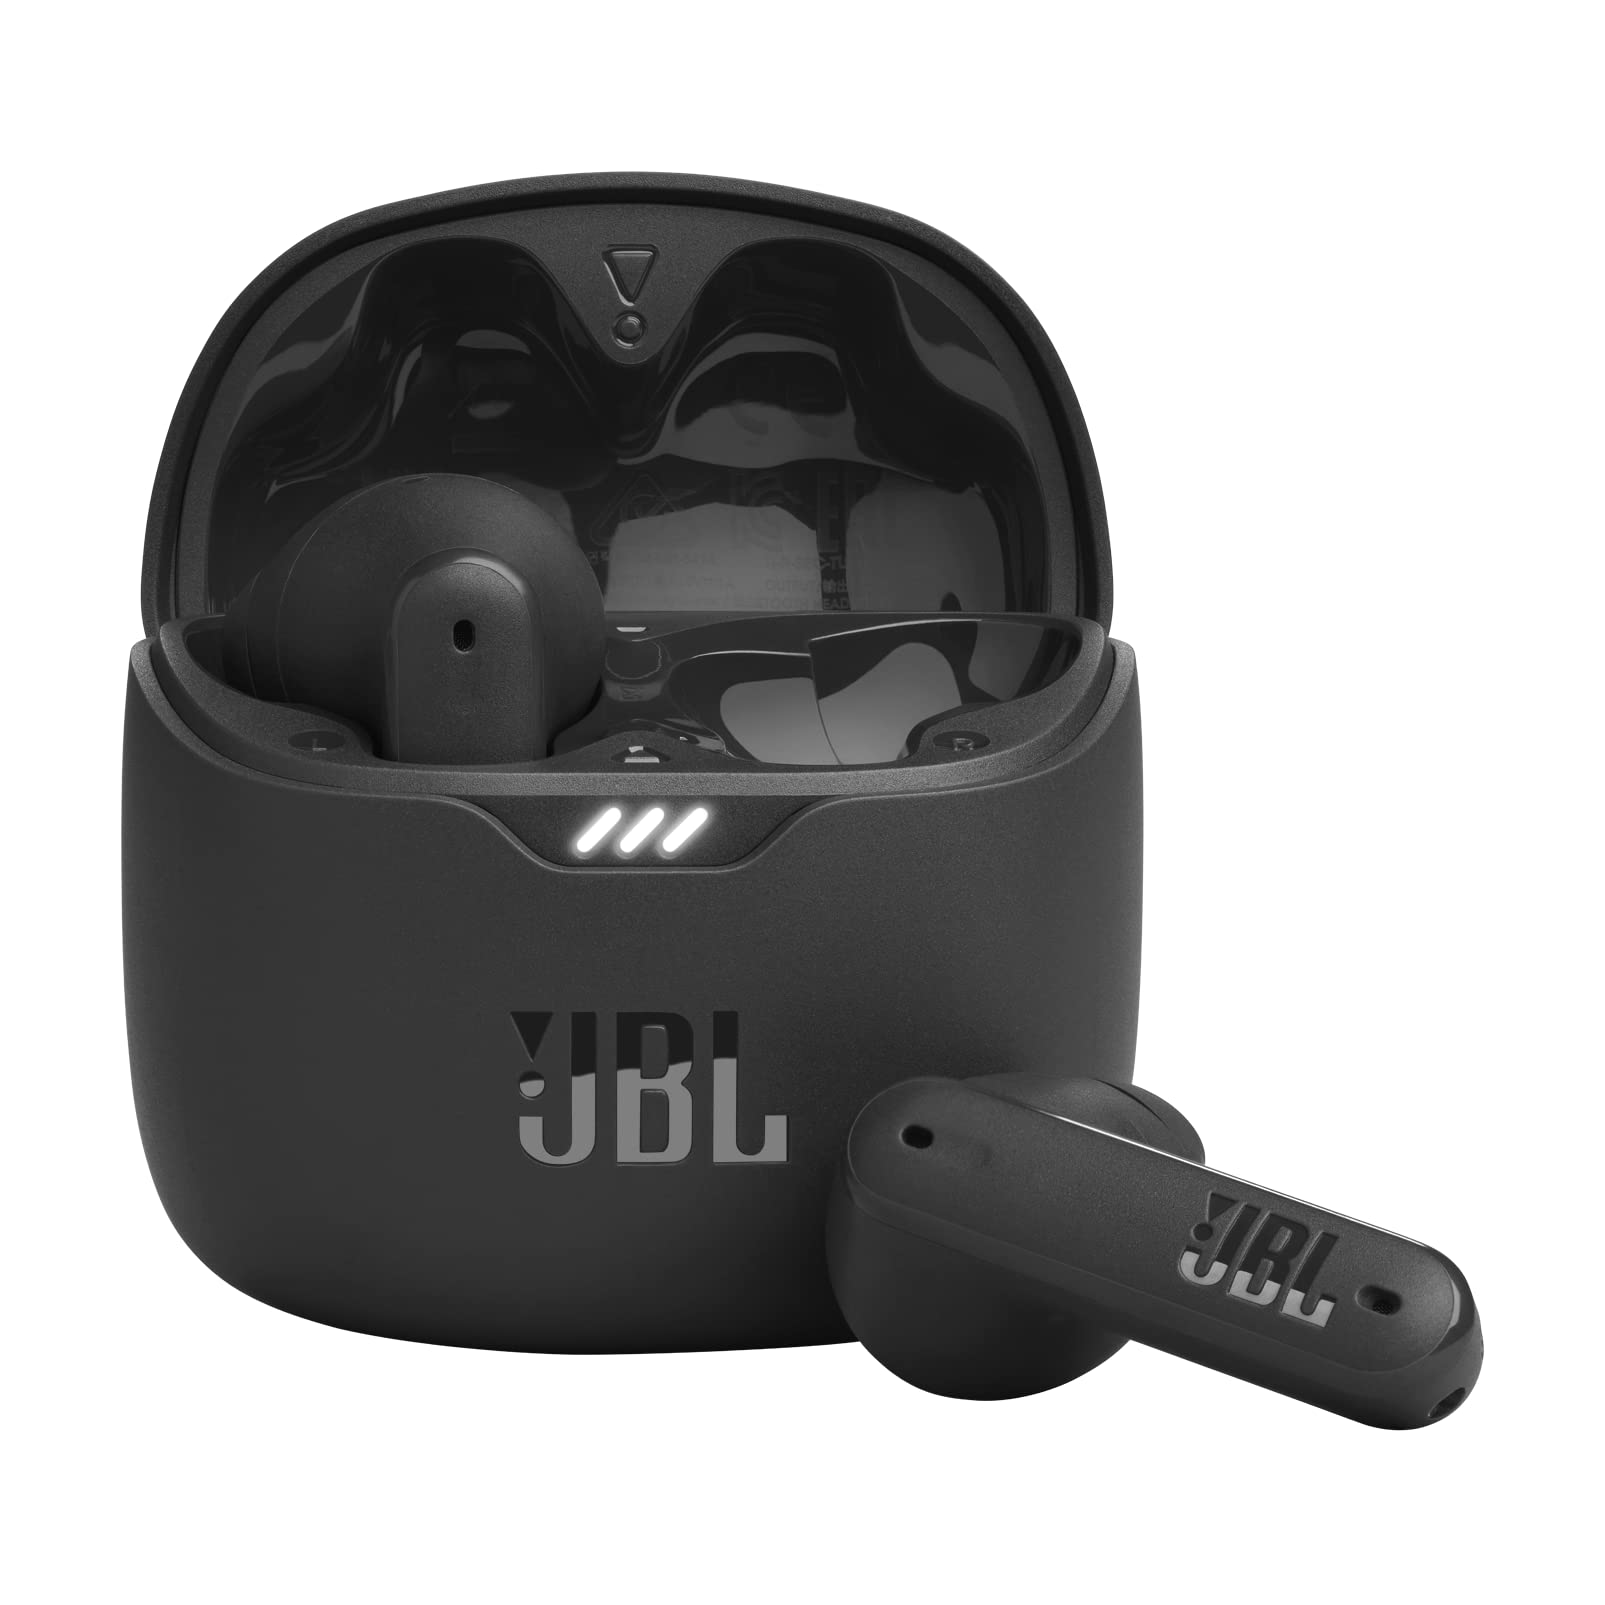 JBL Tune Flex - True Wireless Noise Cancelling Earbuds (Black) for $69.95 at Amazon